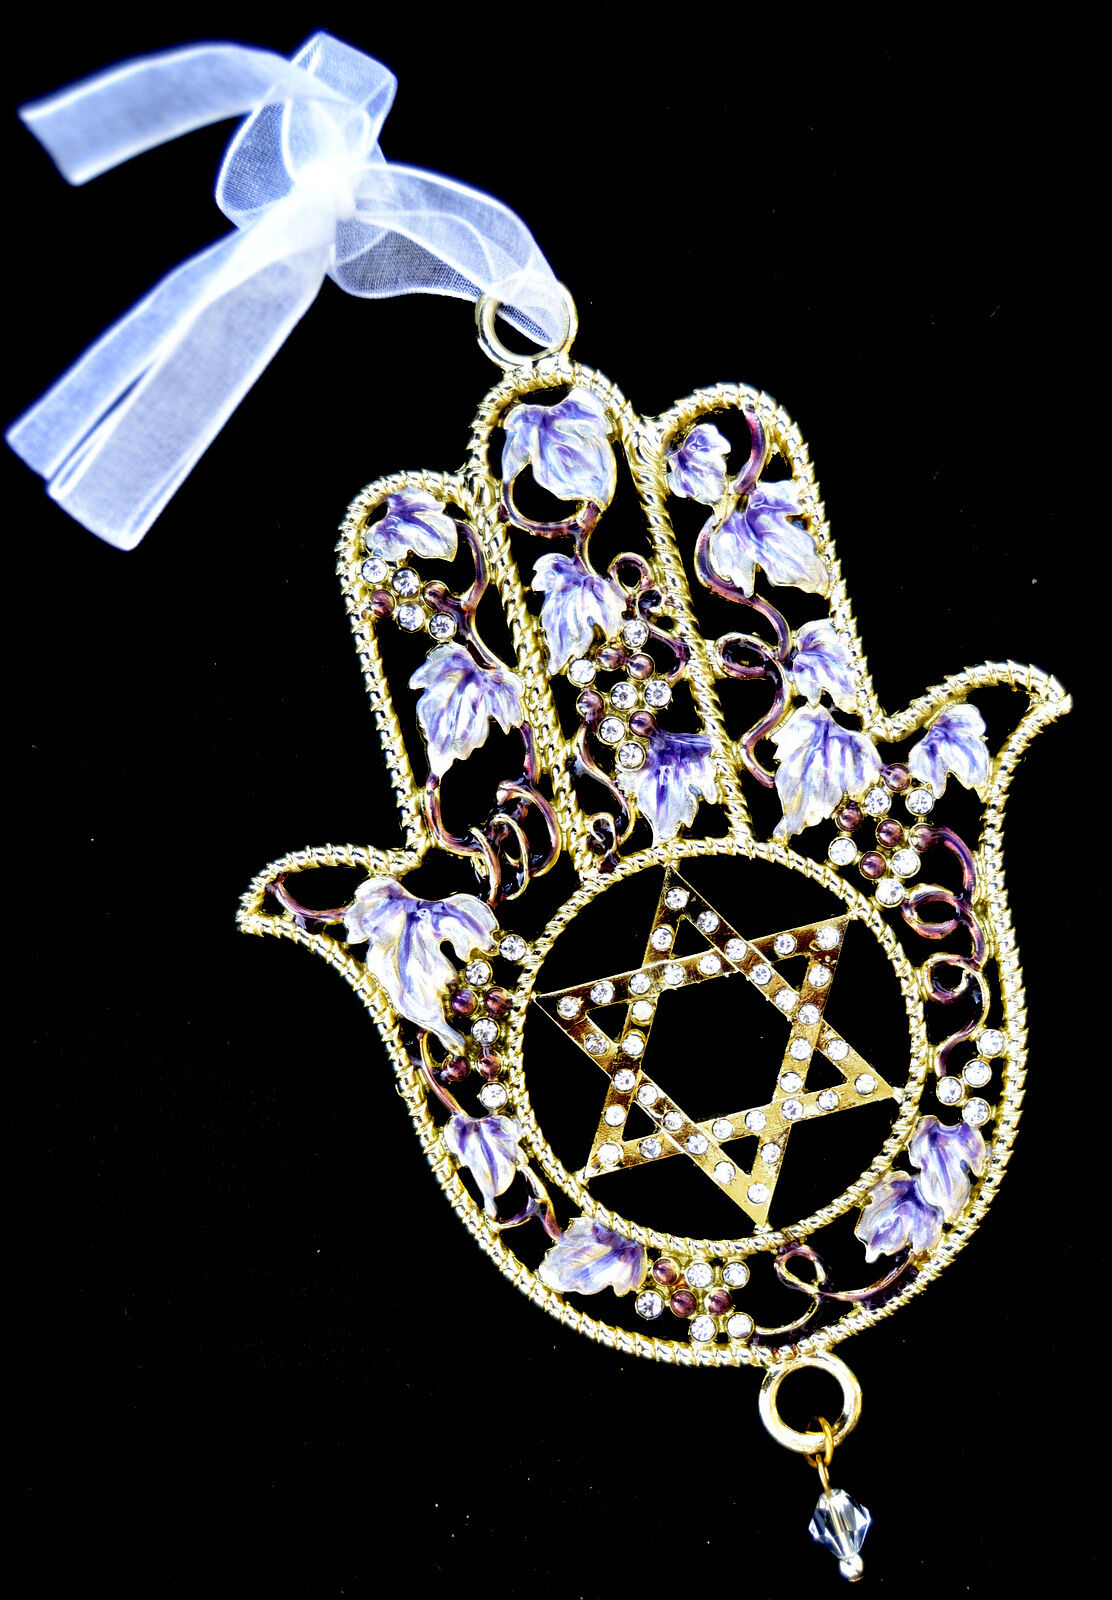 Enameled Jeweled wall hanging Hamsa with Star of David Clear stones.israel